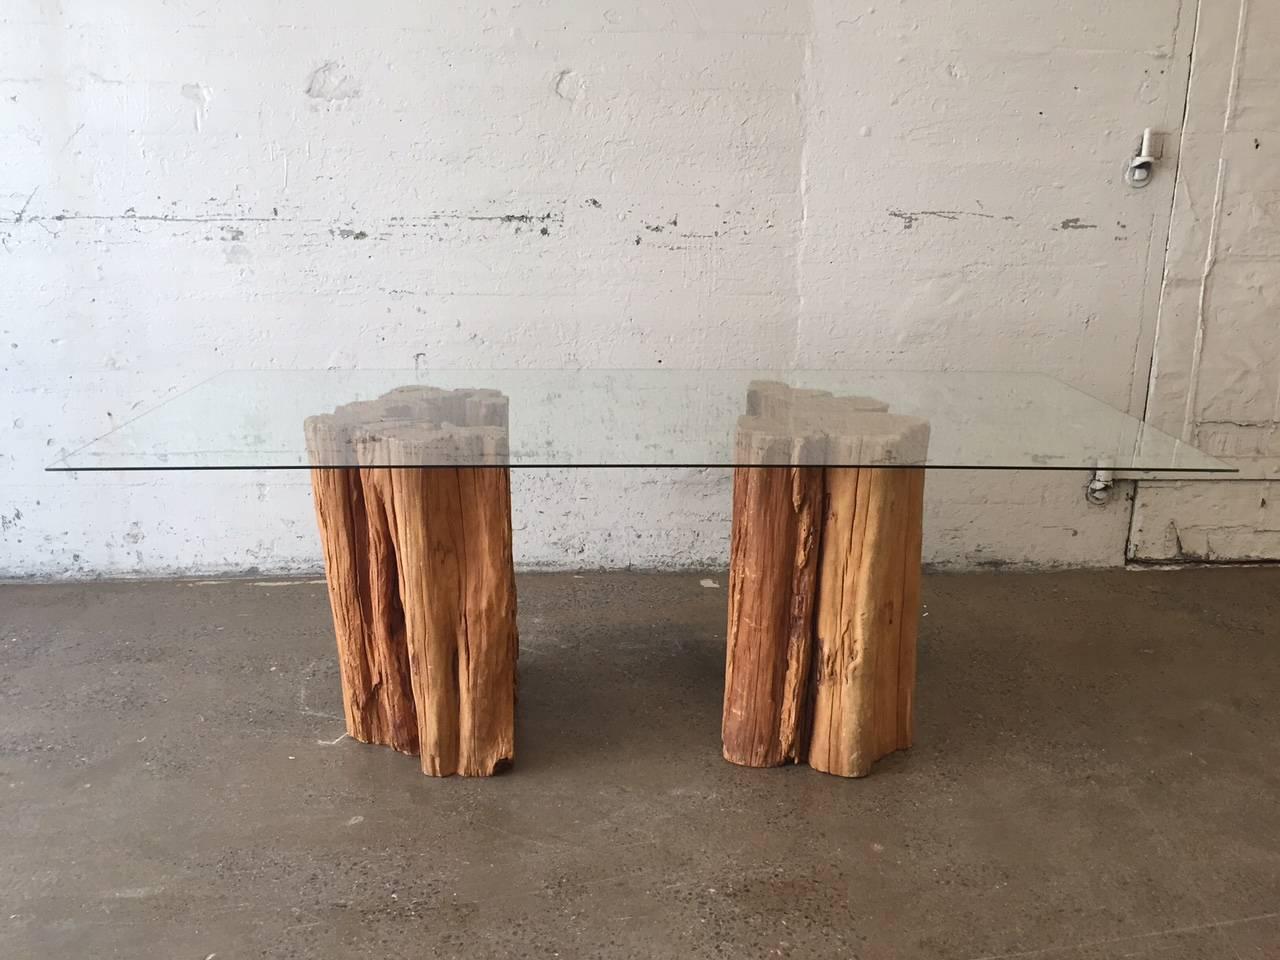 Halved Ipe wood trunk pedestal dining table with a glass top. The trunks have natural splitting and grain variations throughout.